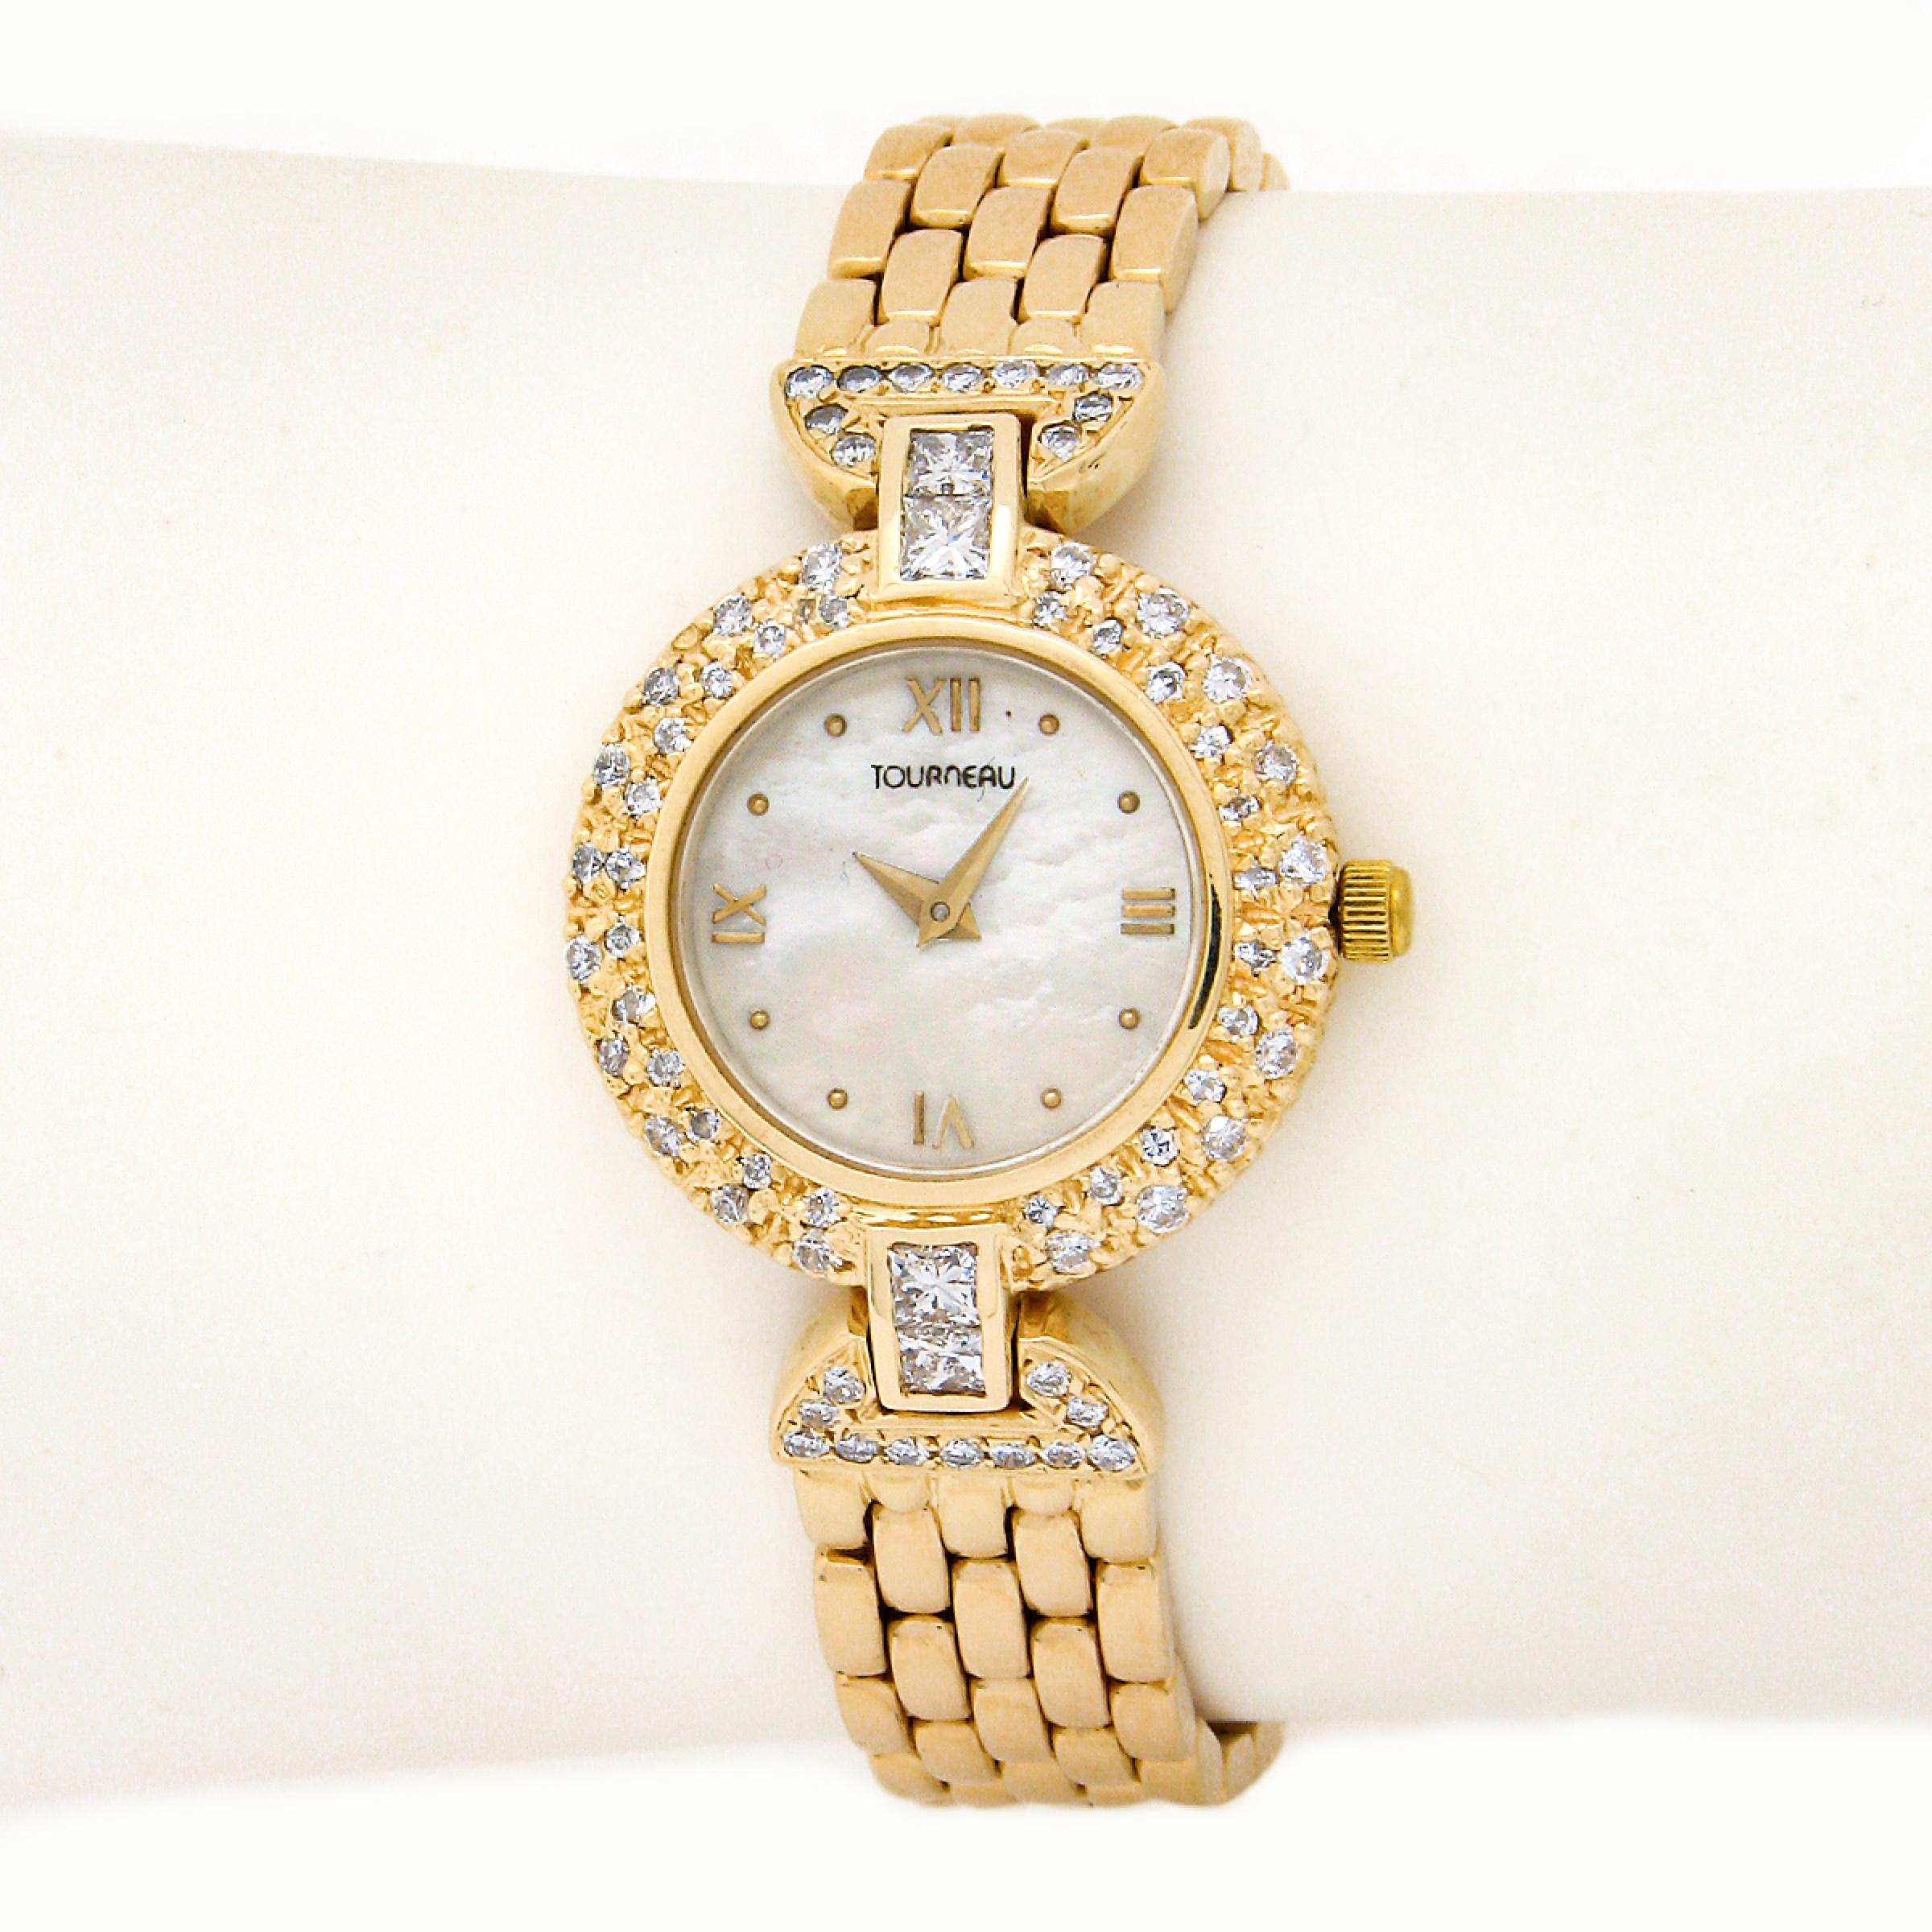 This fancy and super elegant ladies' wrist watch by Tourneau is completely crafted from solid 14k yellow gold. It features a lovely mother of pearl dial and a 22.3mm round shaped case that is adorned with the round brilliant cut diamonds and are